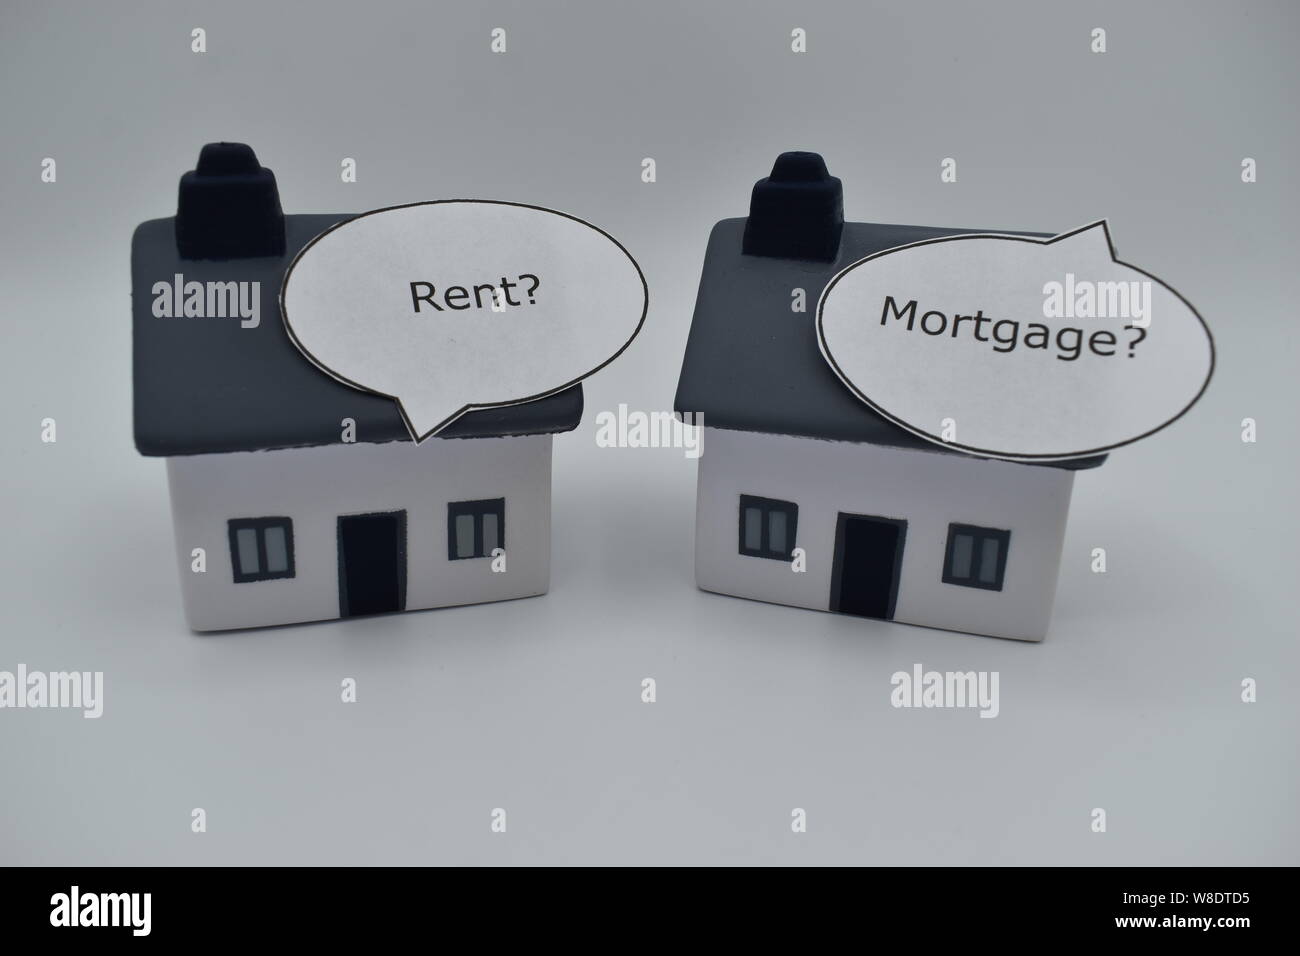 Two houses with speech boxes, one says 'Rent?', the other says 'Buy?'.  It's a dilemma facing the young and some older people. Stock Photo